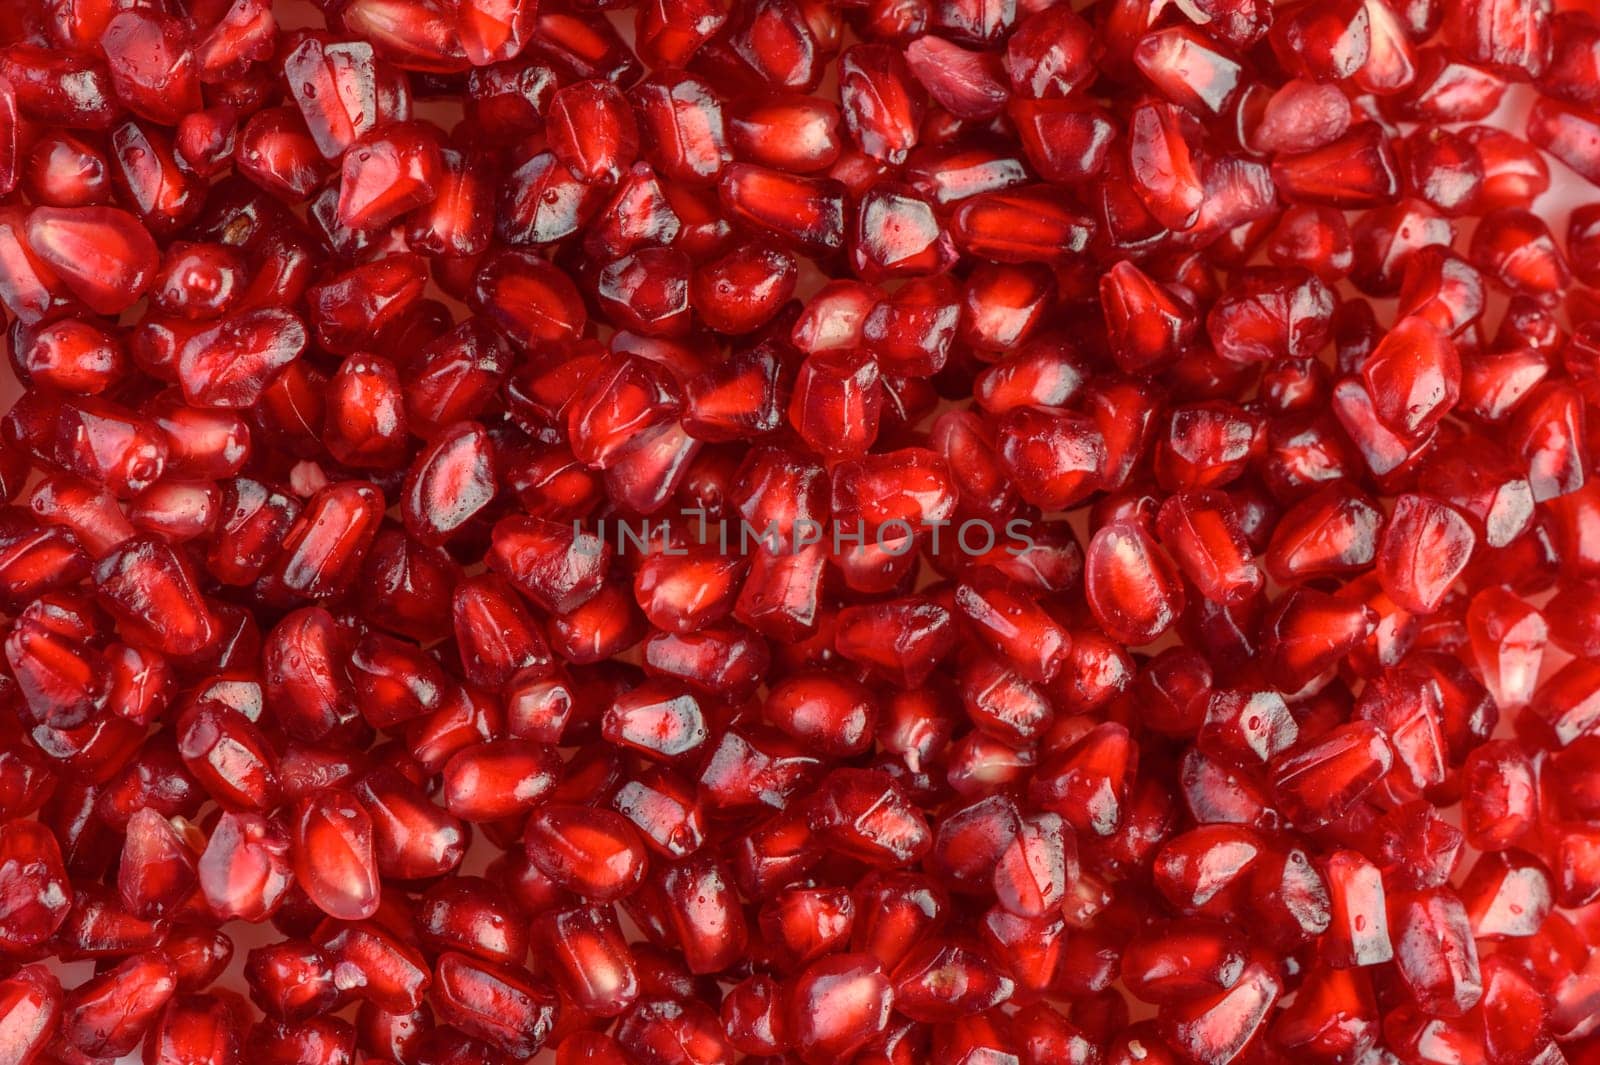 juicy pomegranate seeds on white background 1 by Mixa74